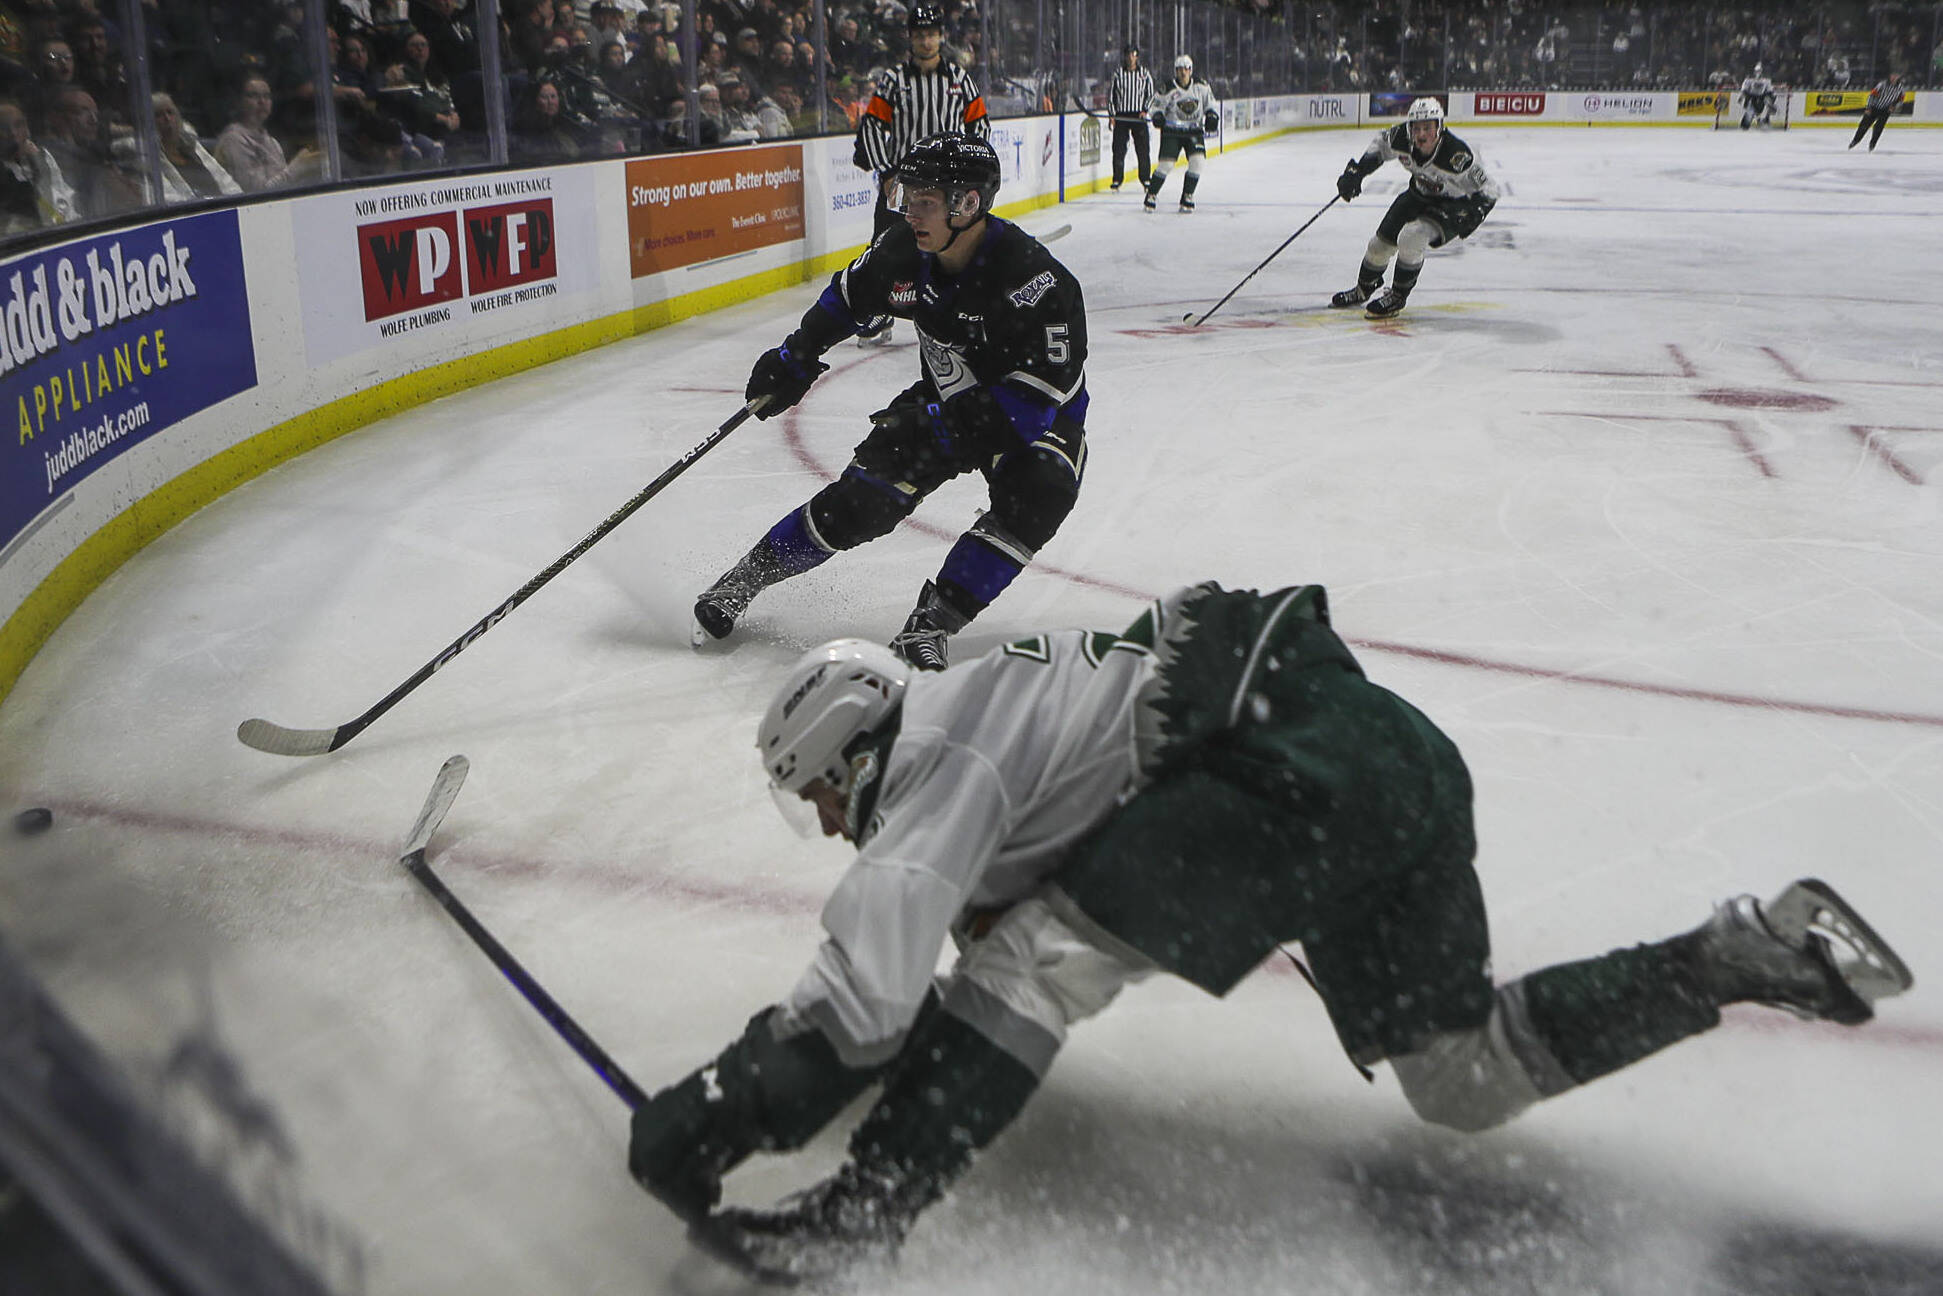 Silvertips’ Teague Patton (29) fights for the puck during a game between the Everett Silvertips and Victoria Royals at the Angel of the Winds Arena on Saturday, Sept. 23. The Silvertips won 5-3. (Annie Barker/Sound Publishing)